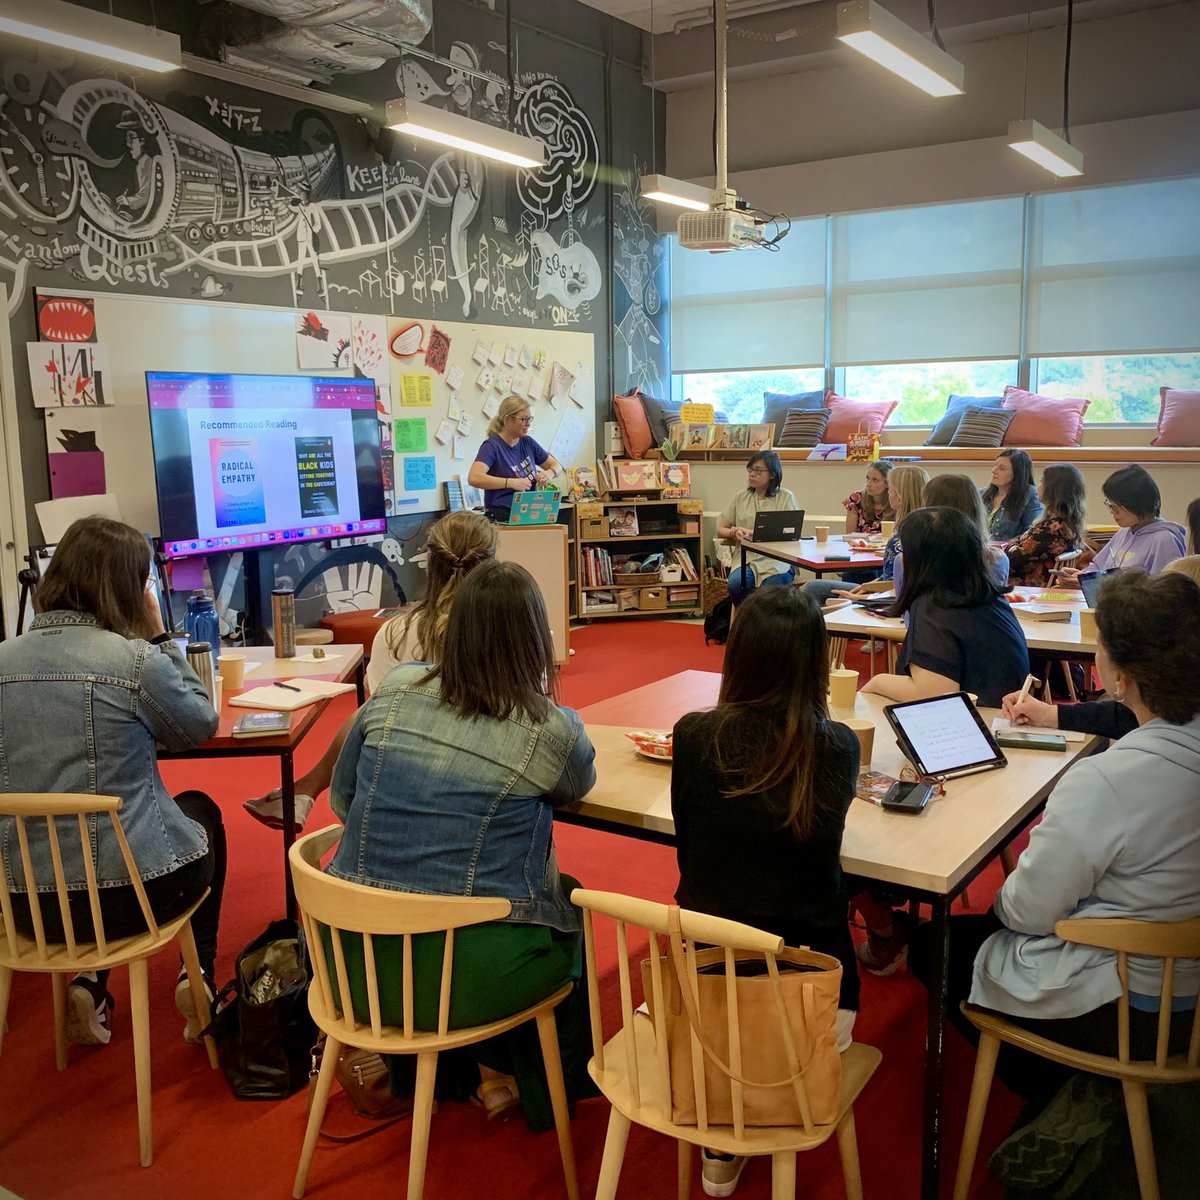 Literacy week reflections from the library @HongKongAcademy with @tgaletti on the PS Library blog! specialists.hkacademy.edu.hk #hkaREADS #literacyweek #teacherlibrarian